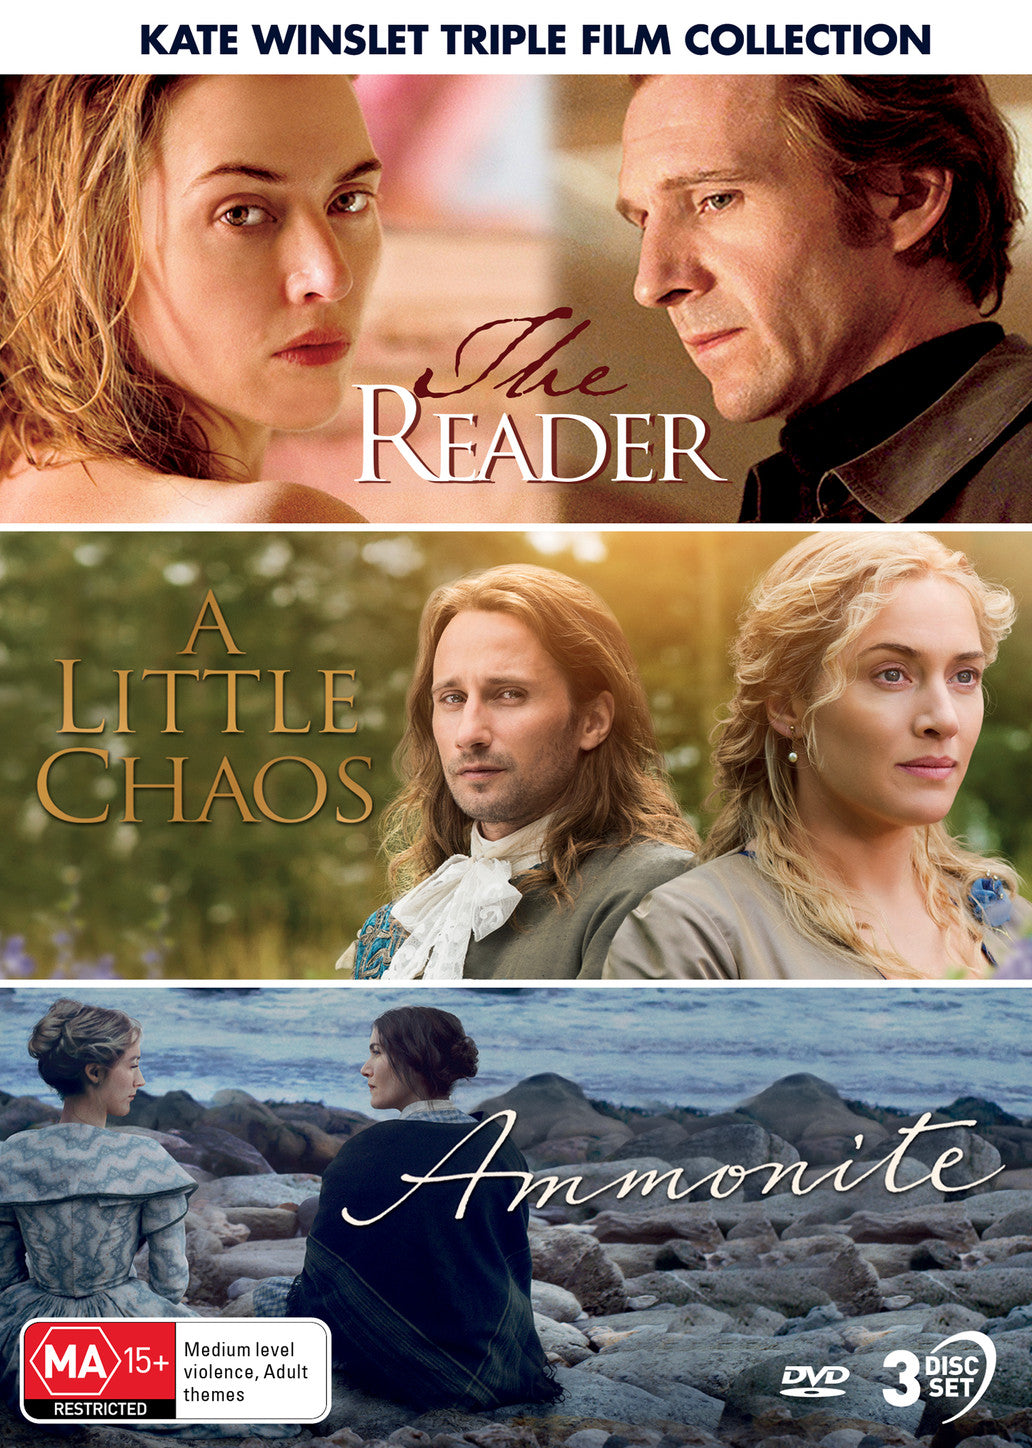 KATE WINSLET: TRIPLE FILM COLLECTION (THE READER / A LITTLE CHAOS / AMMONITE) - DVD